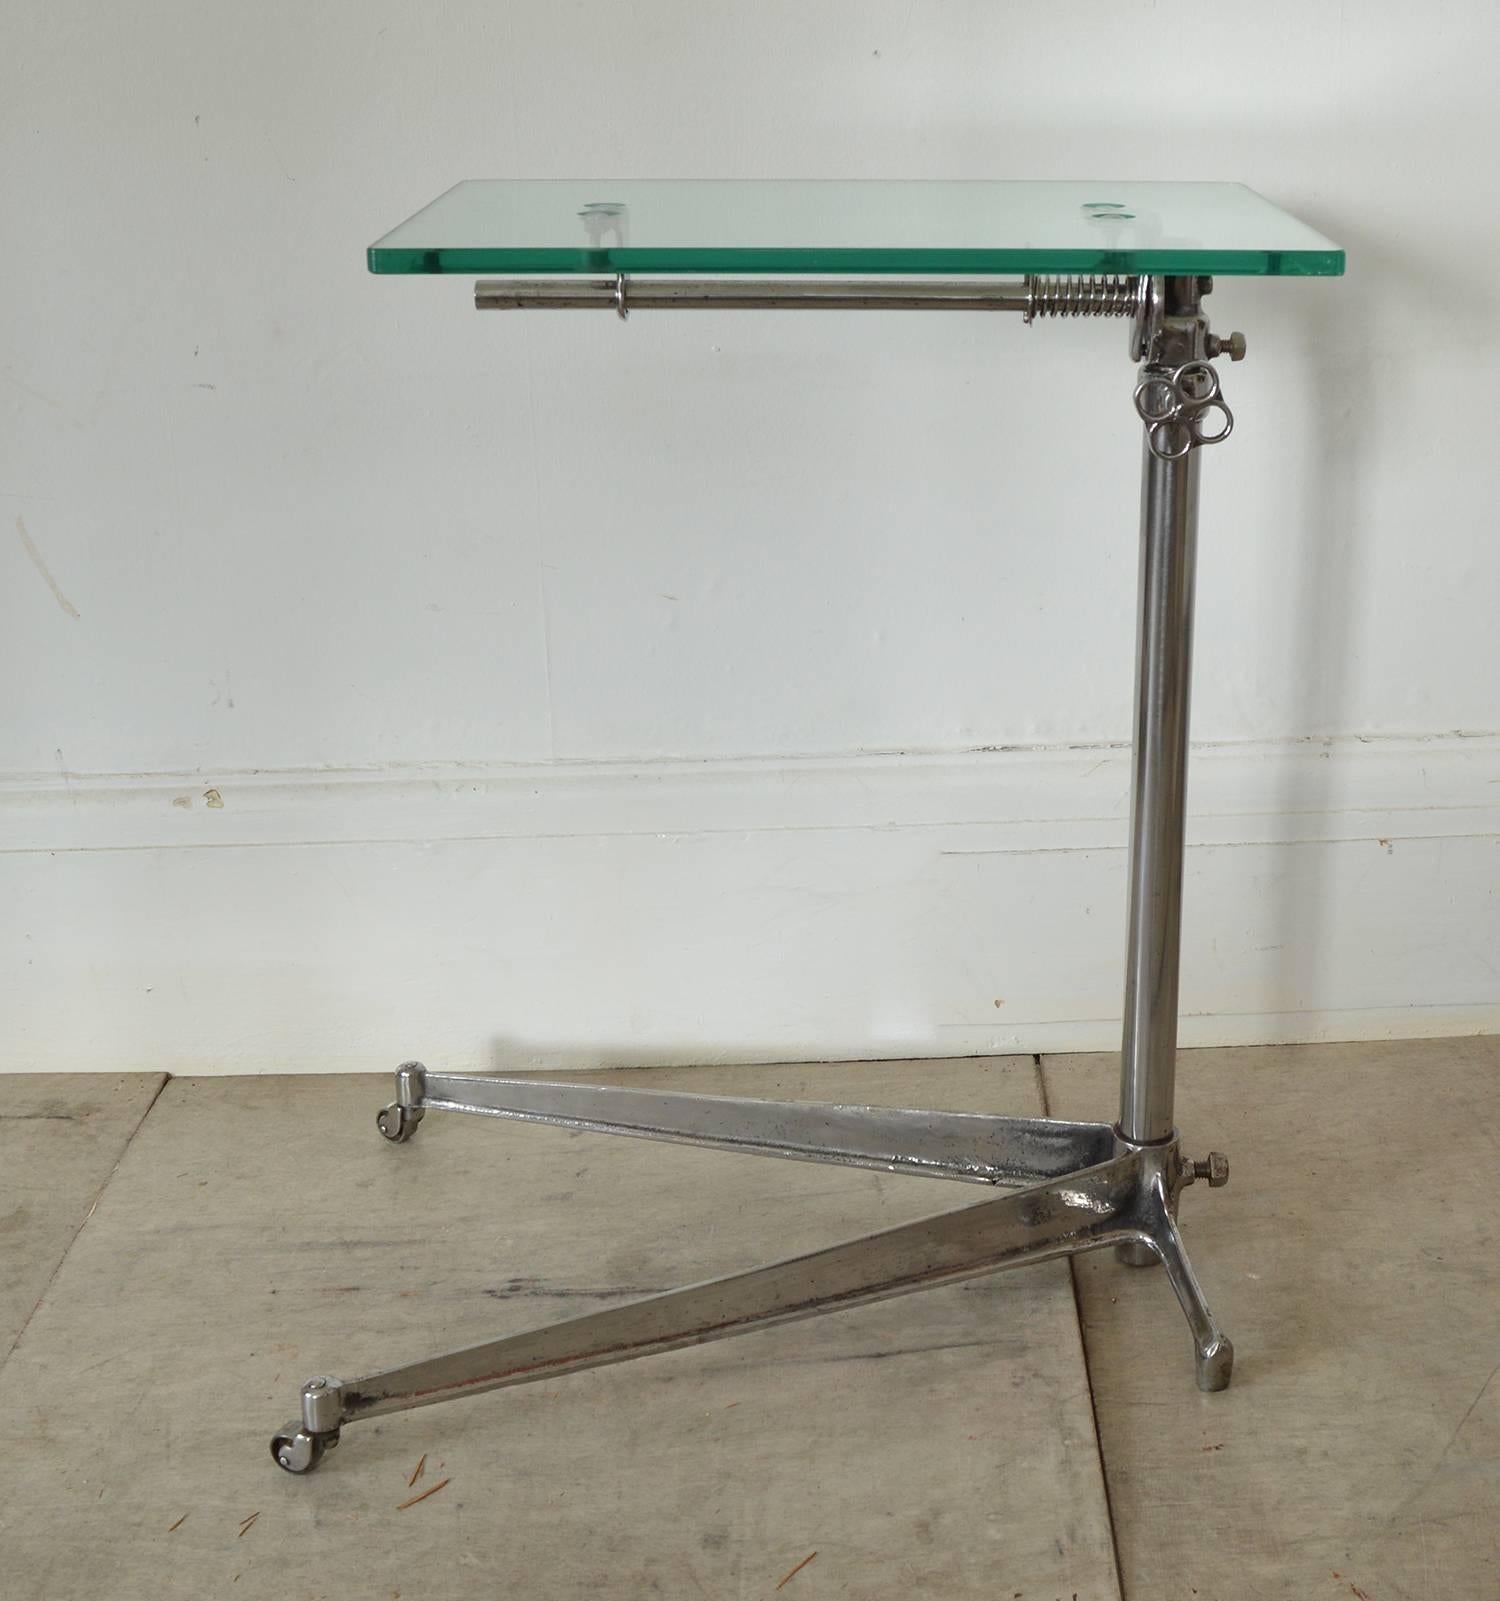 Stylish side or work table with an elegant industrial look.

Made of polished cast iron and steel with a new toughened glass top.

The top is adjustable by loosening the handle or wheel on the side.

The top can also be tilted.

On the